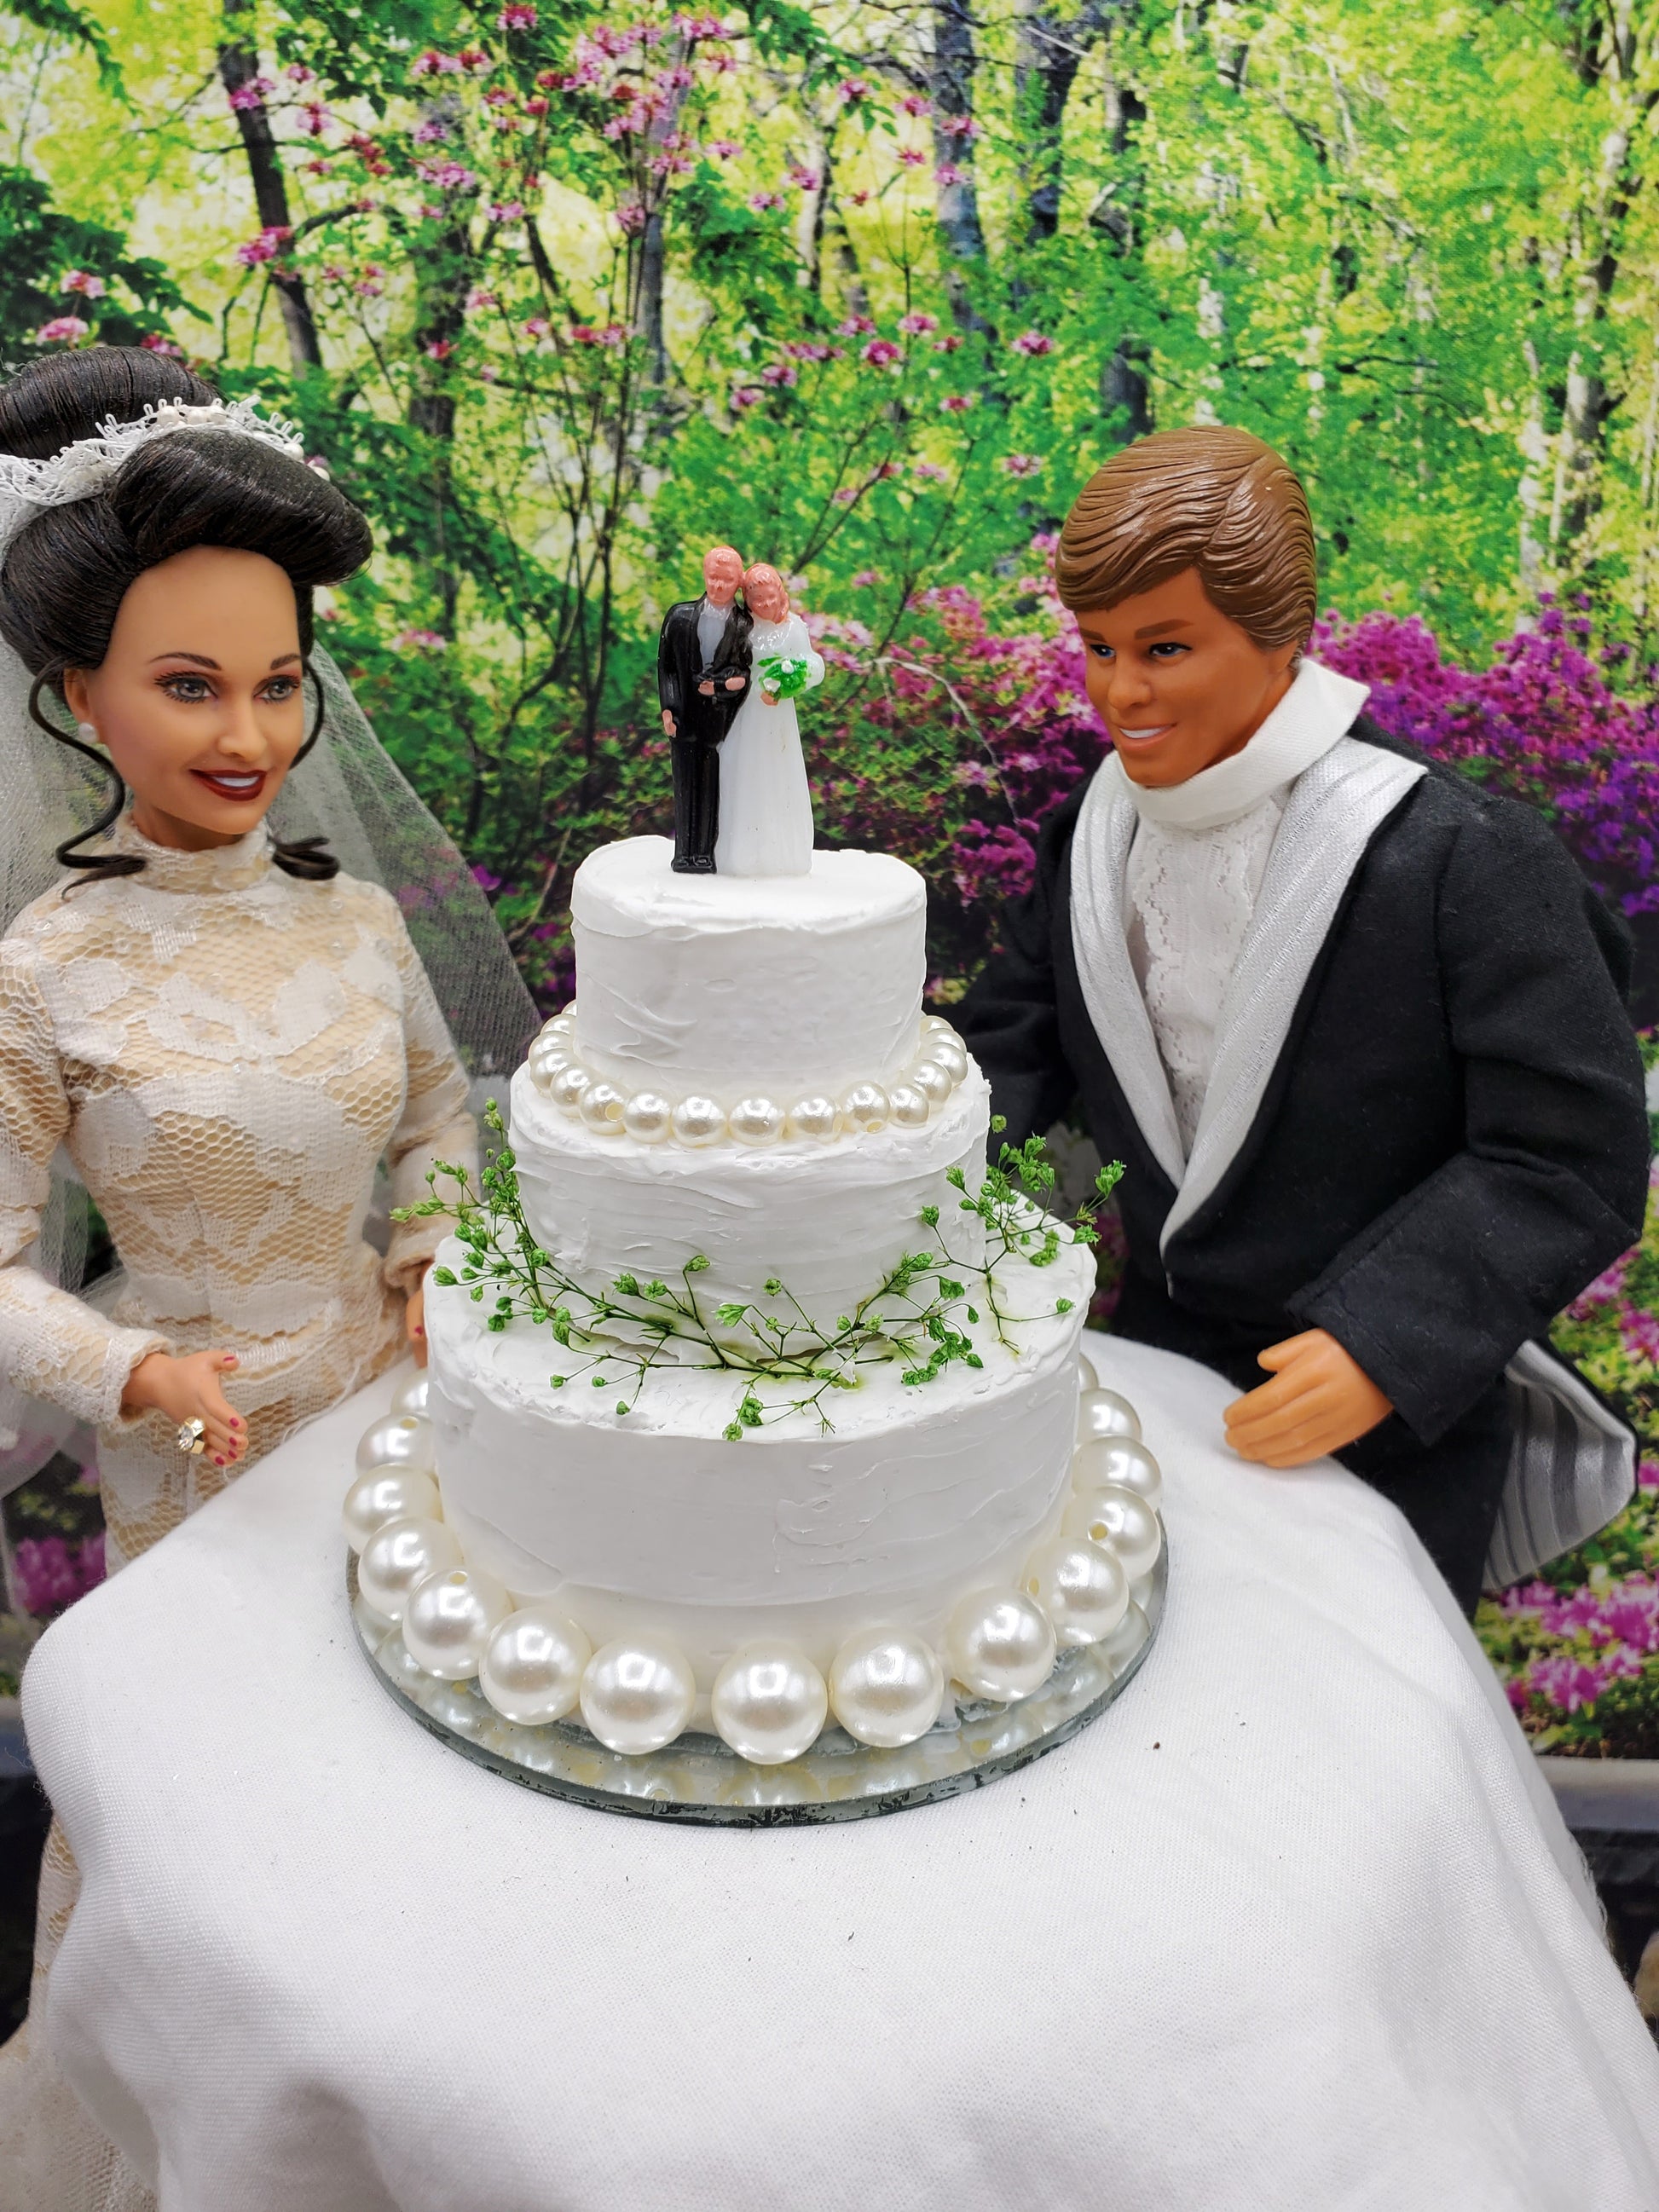 Barbie and ken with 3 layered wedding cake